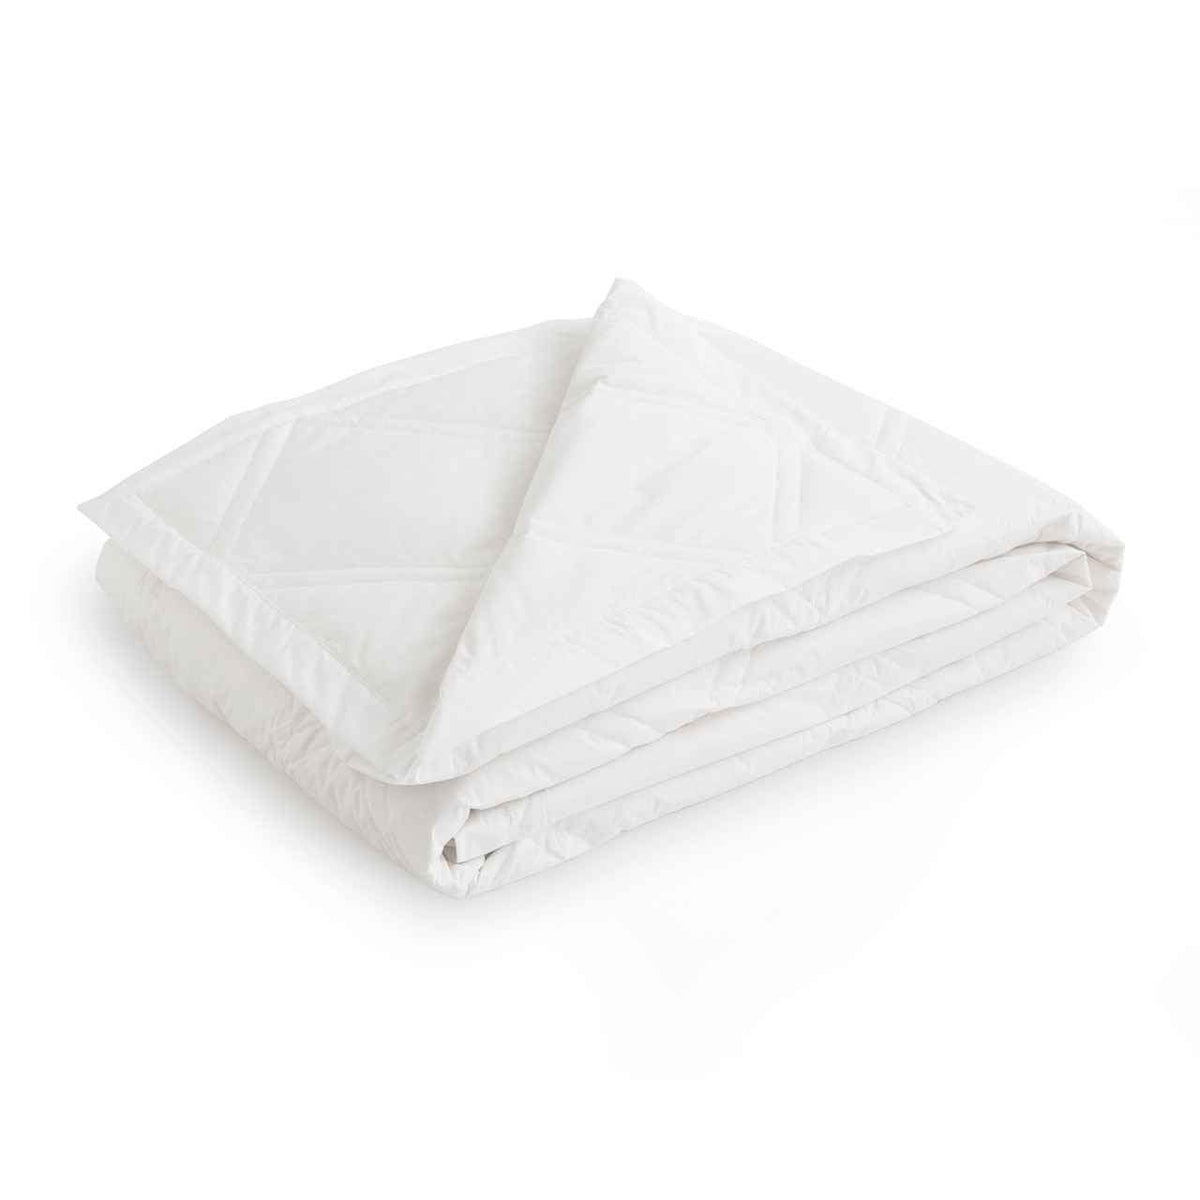 Downlite Lightweight WDD 300 TC Double Diamond Quilted Down Blanket - beddingbag.com